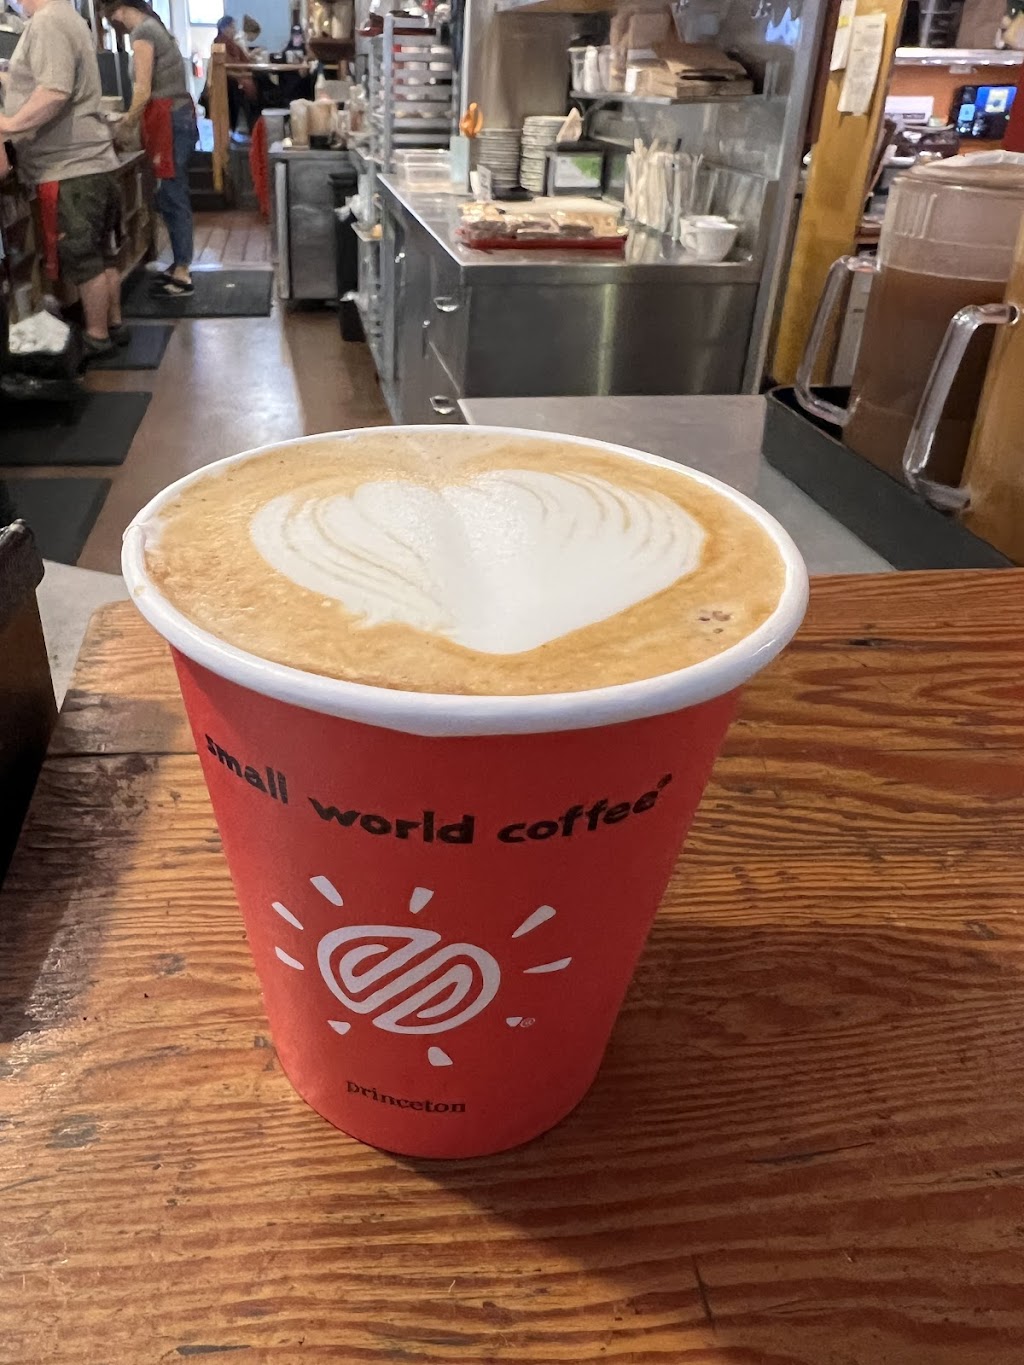 Small World Coffee | 14 Witherspoon St, Princeton, NJ 08540 | Phone: (609) 924-4377 ext. 2